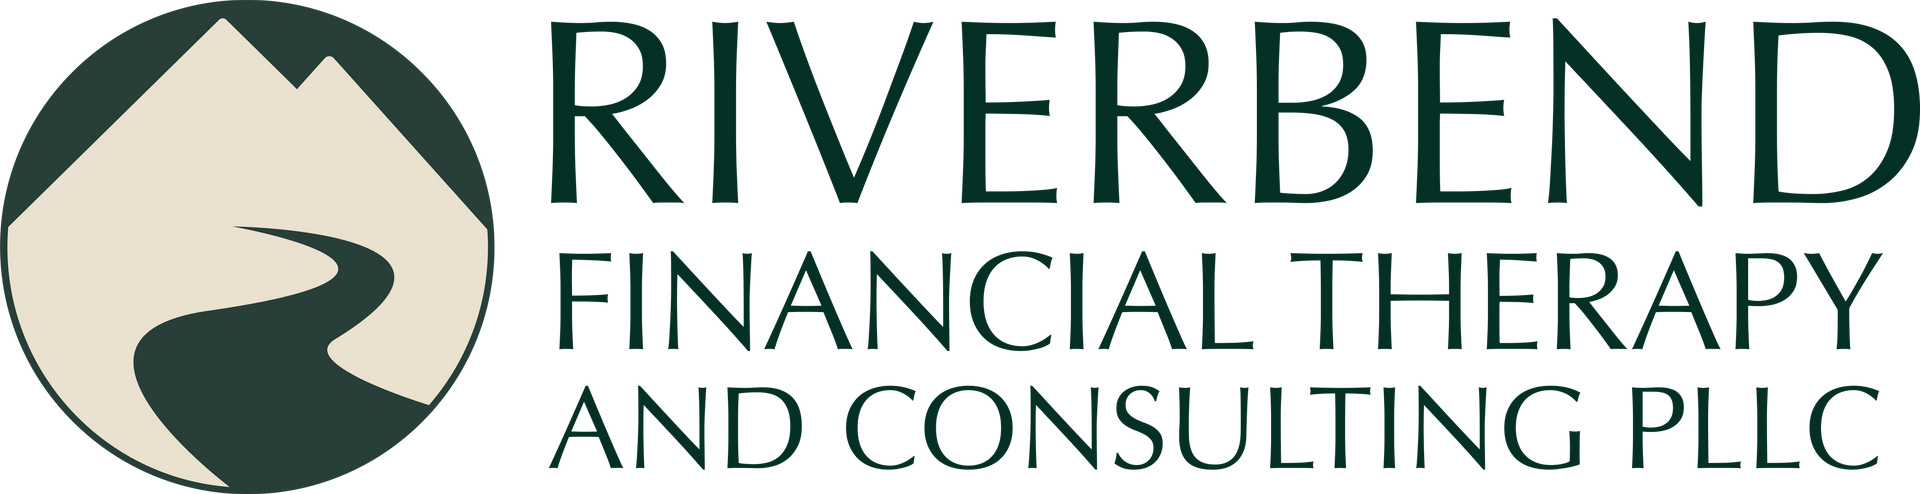 The logo for riverbend financial therapy and consulting pllc